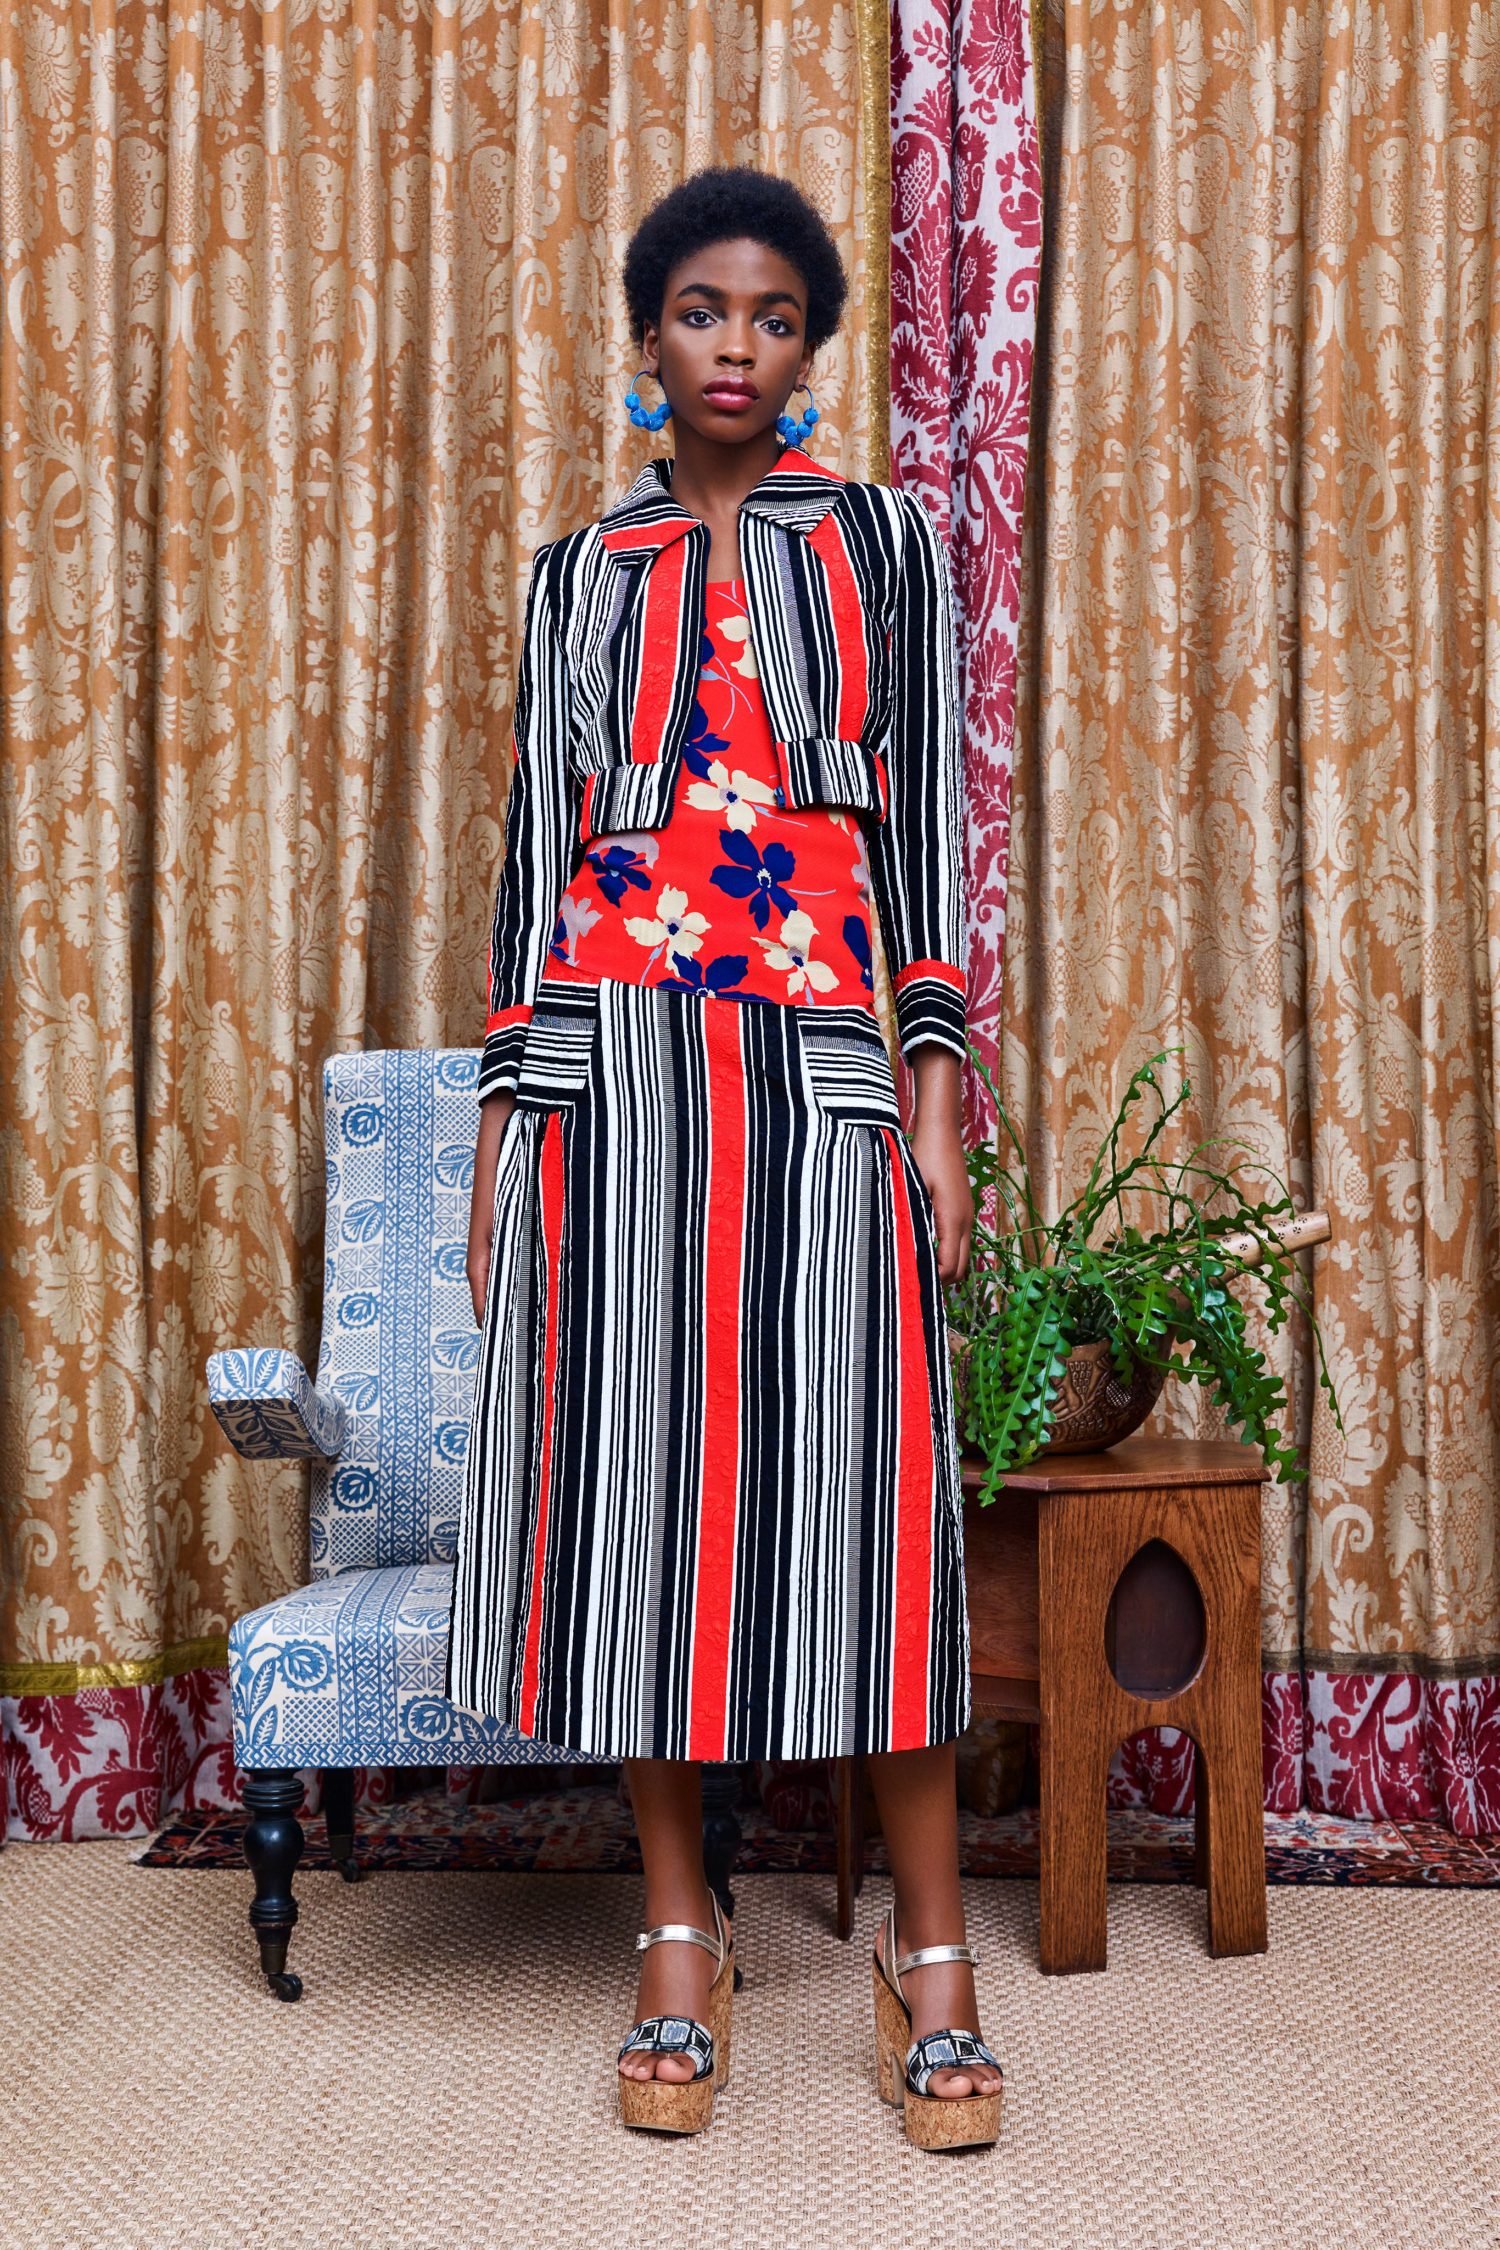 All The Looks From Duro Olowu’s Spring/Summer 2019 Collection